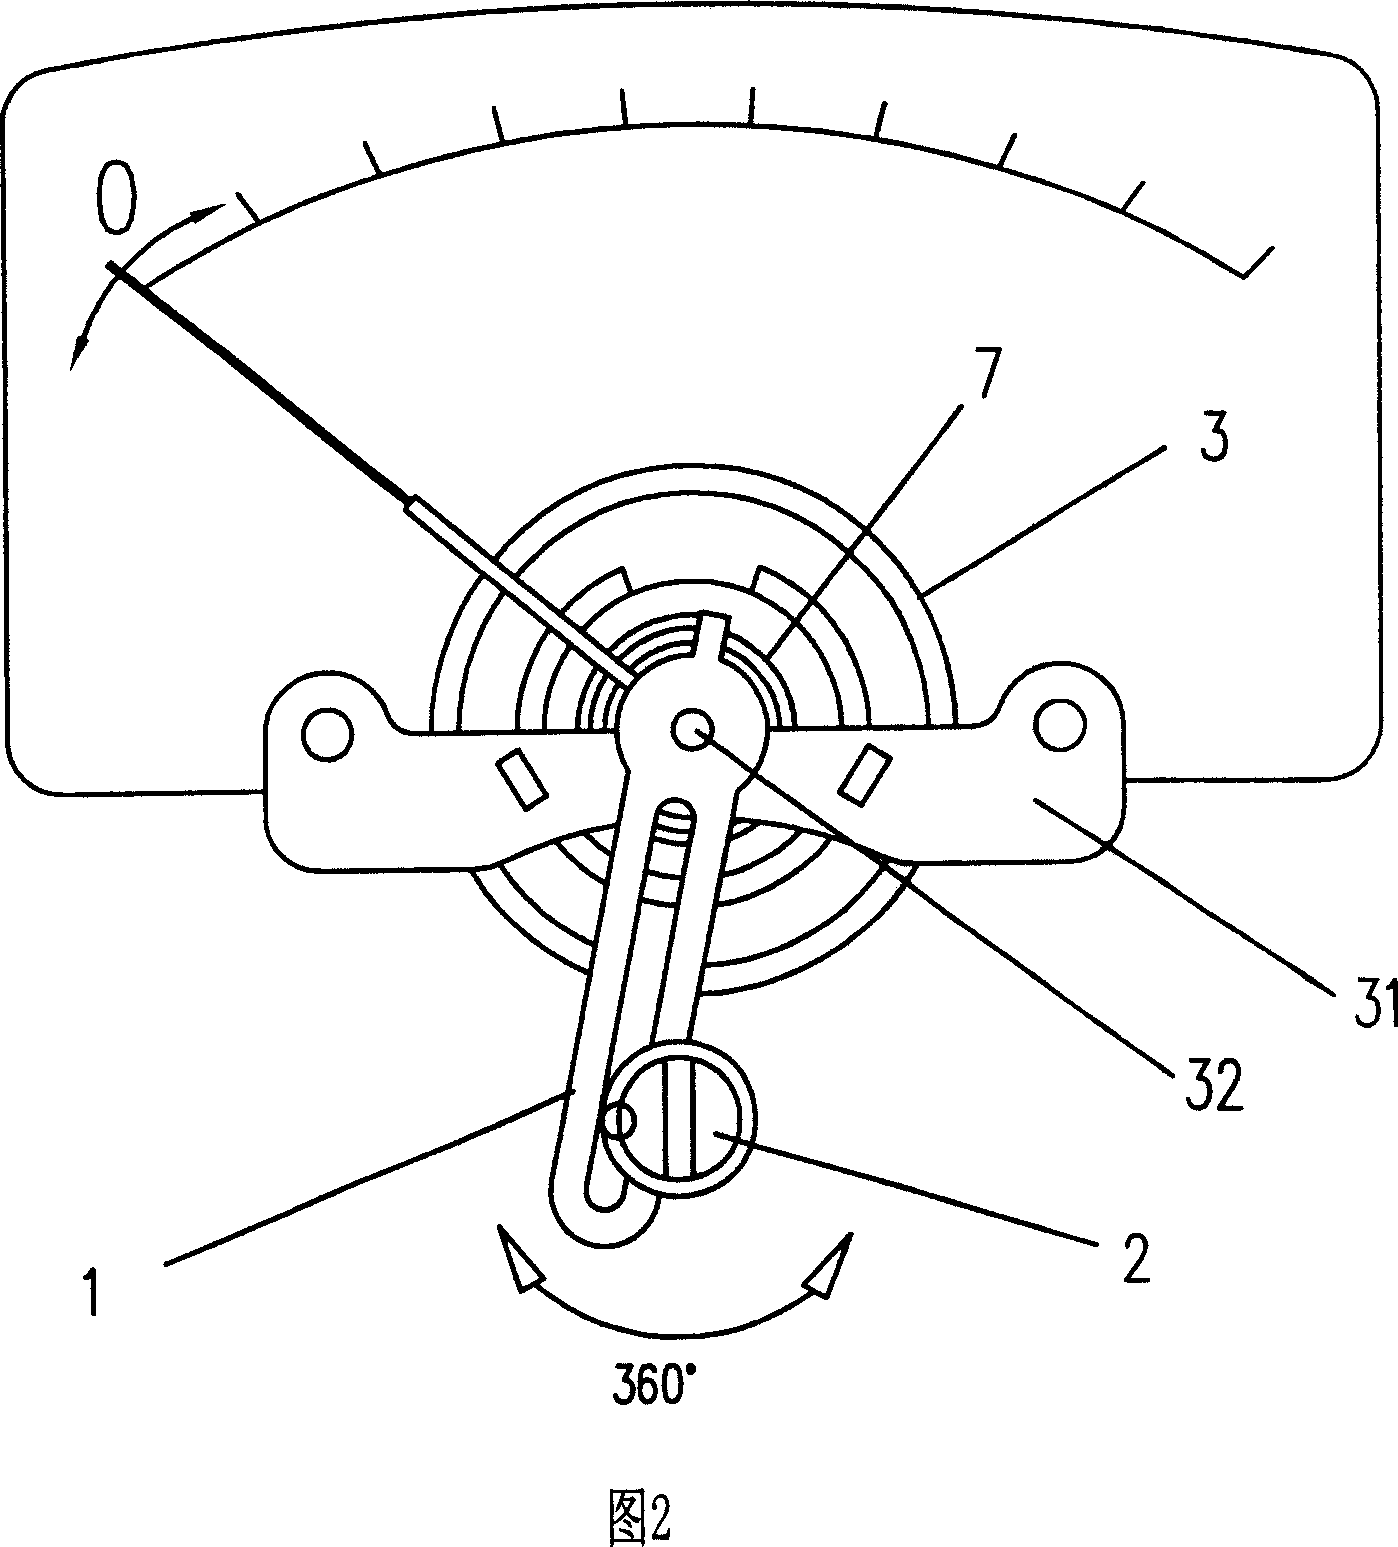 Zero-setting device for electrical measuring instrument and method for raising air breakdown-resisting voltage value of electric measuring instrument